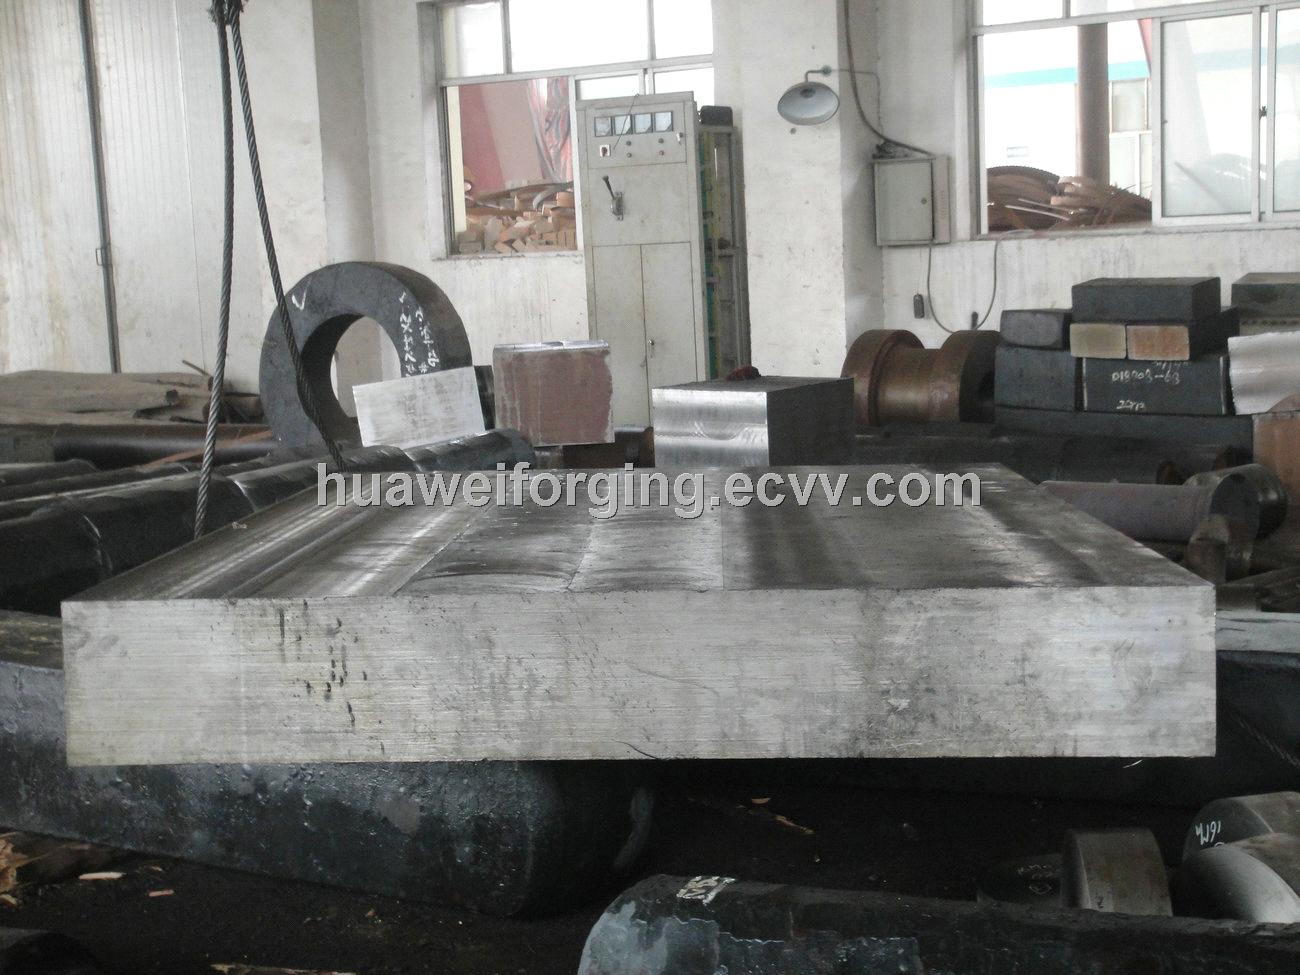 Open die forging die blocks for plastic injection moulds